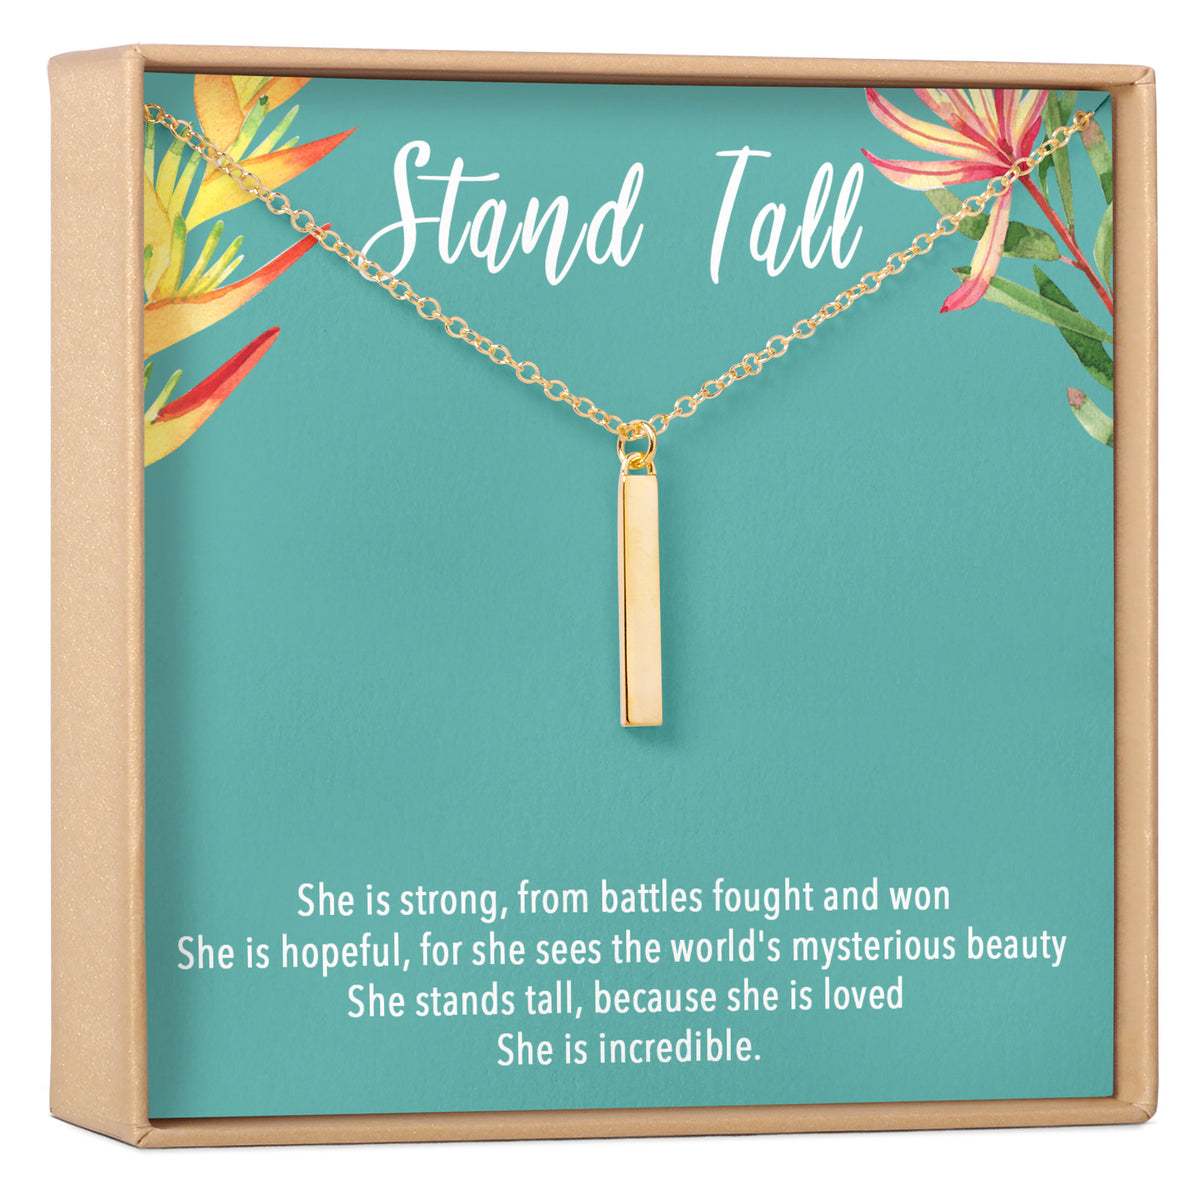 Inspirational Necklace